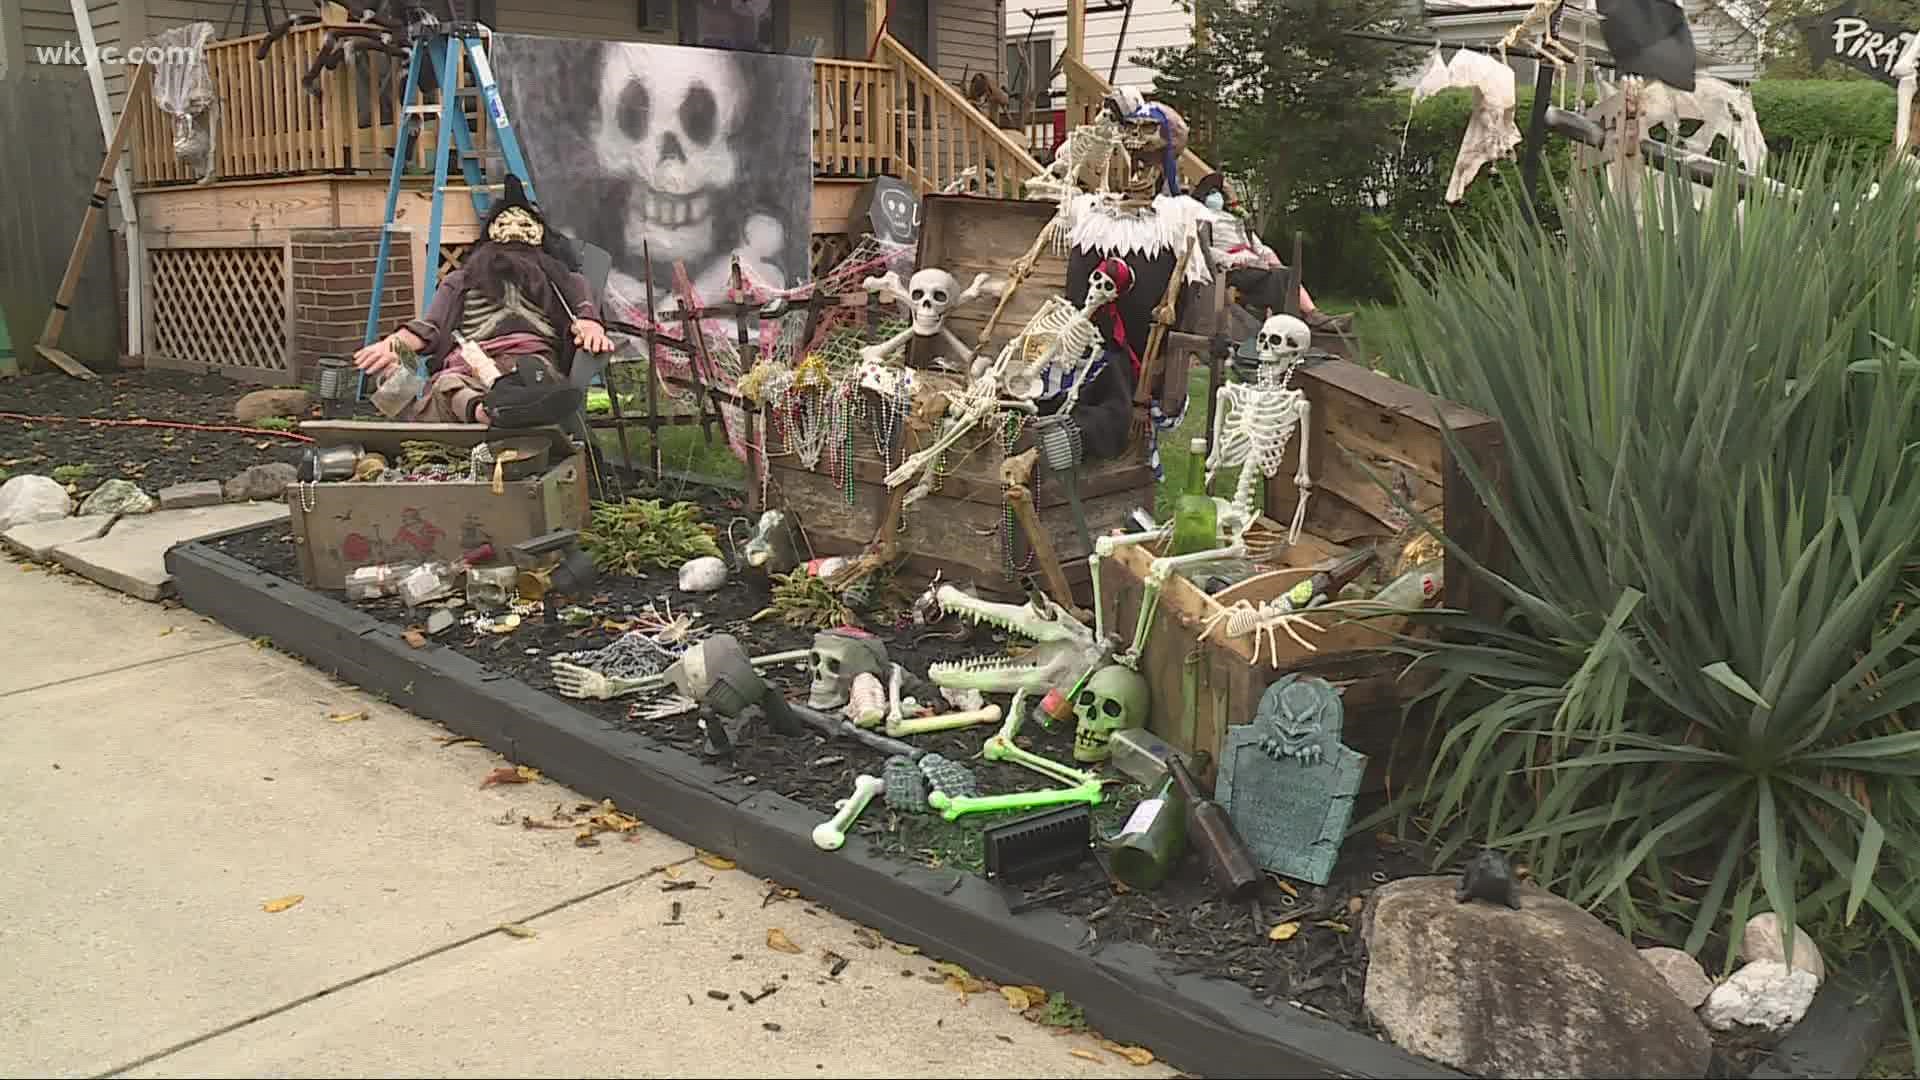 Residents decorate for Halloween together, bringing the whole street closer.